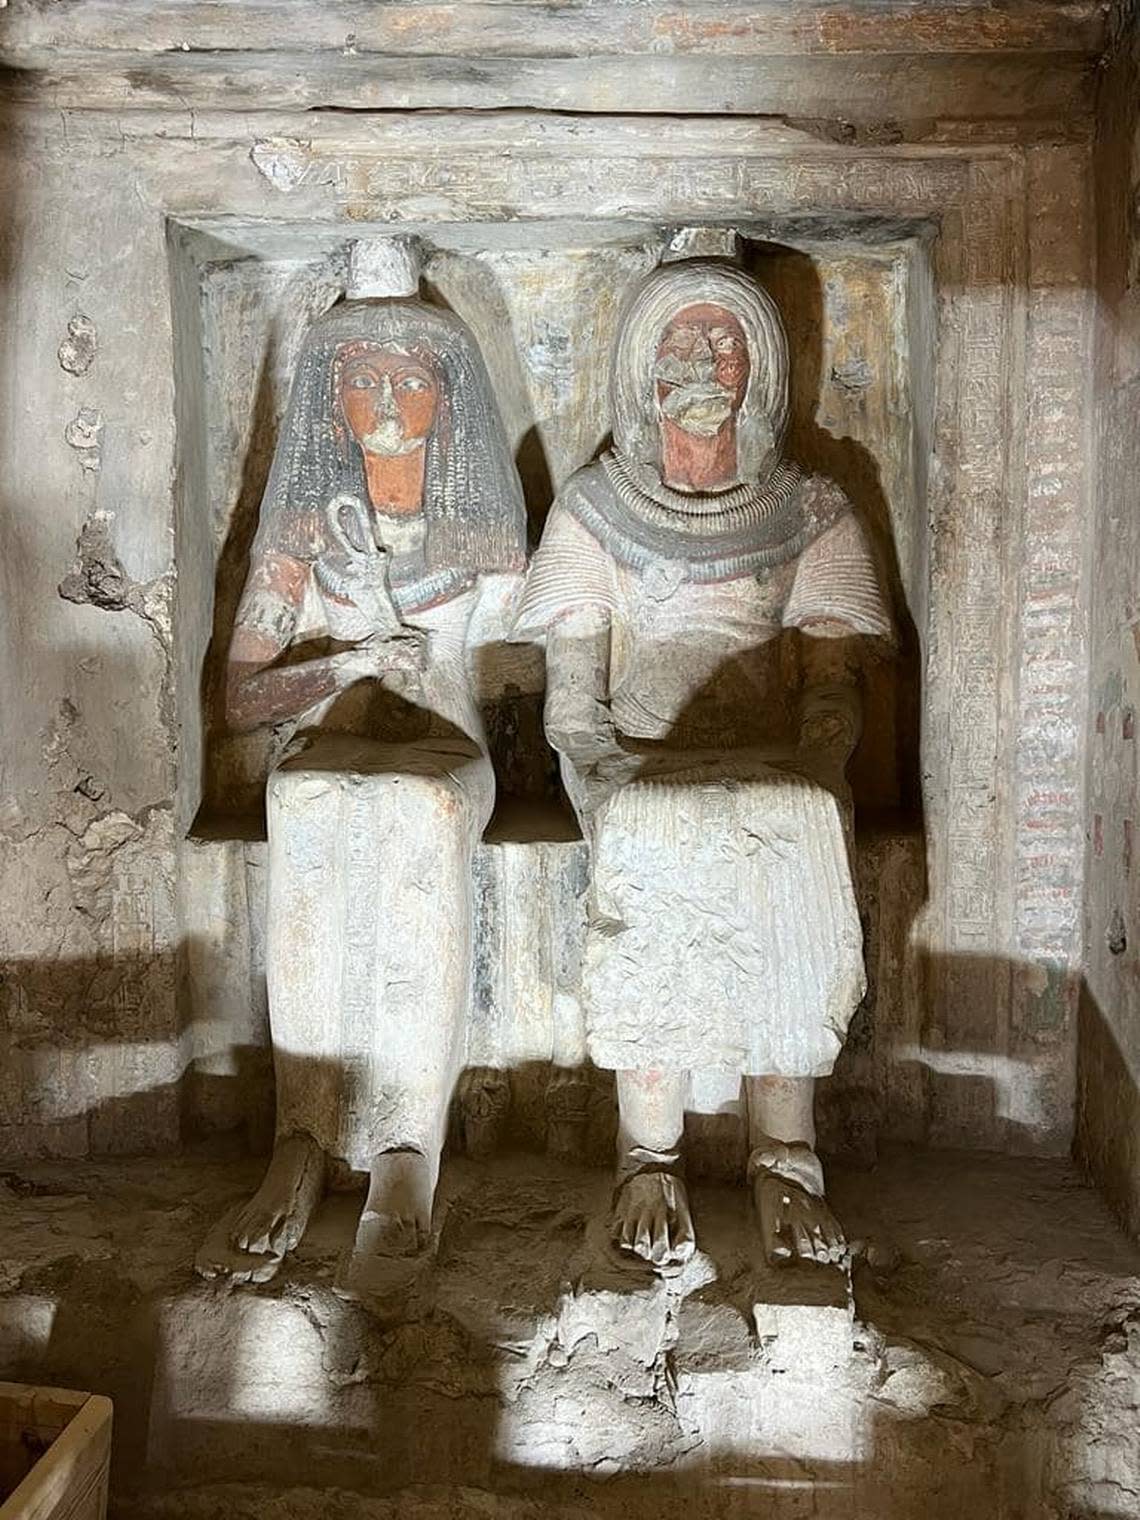 The statues of Neferhotep and his family inside his restored 3,300-year-old tomb.